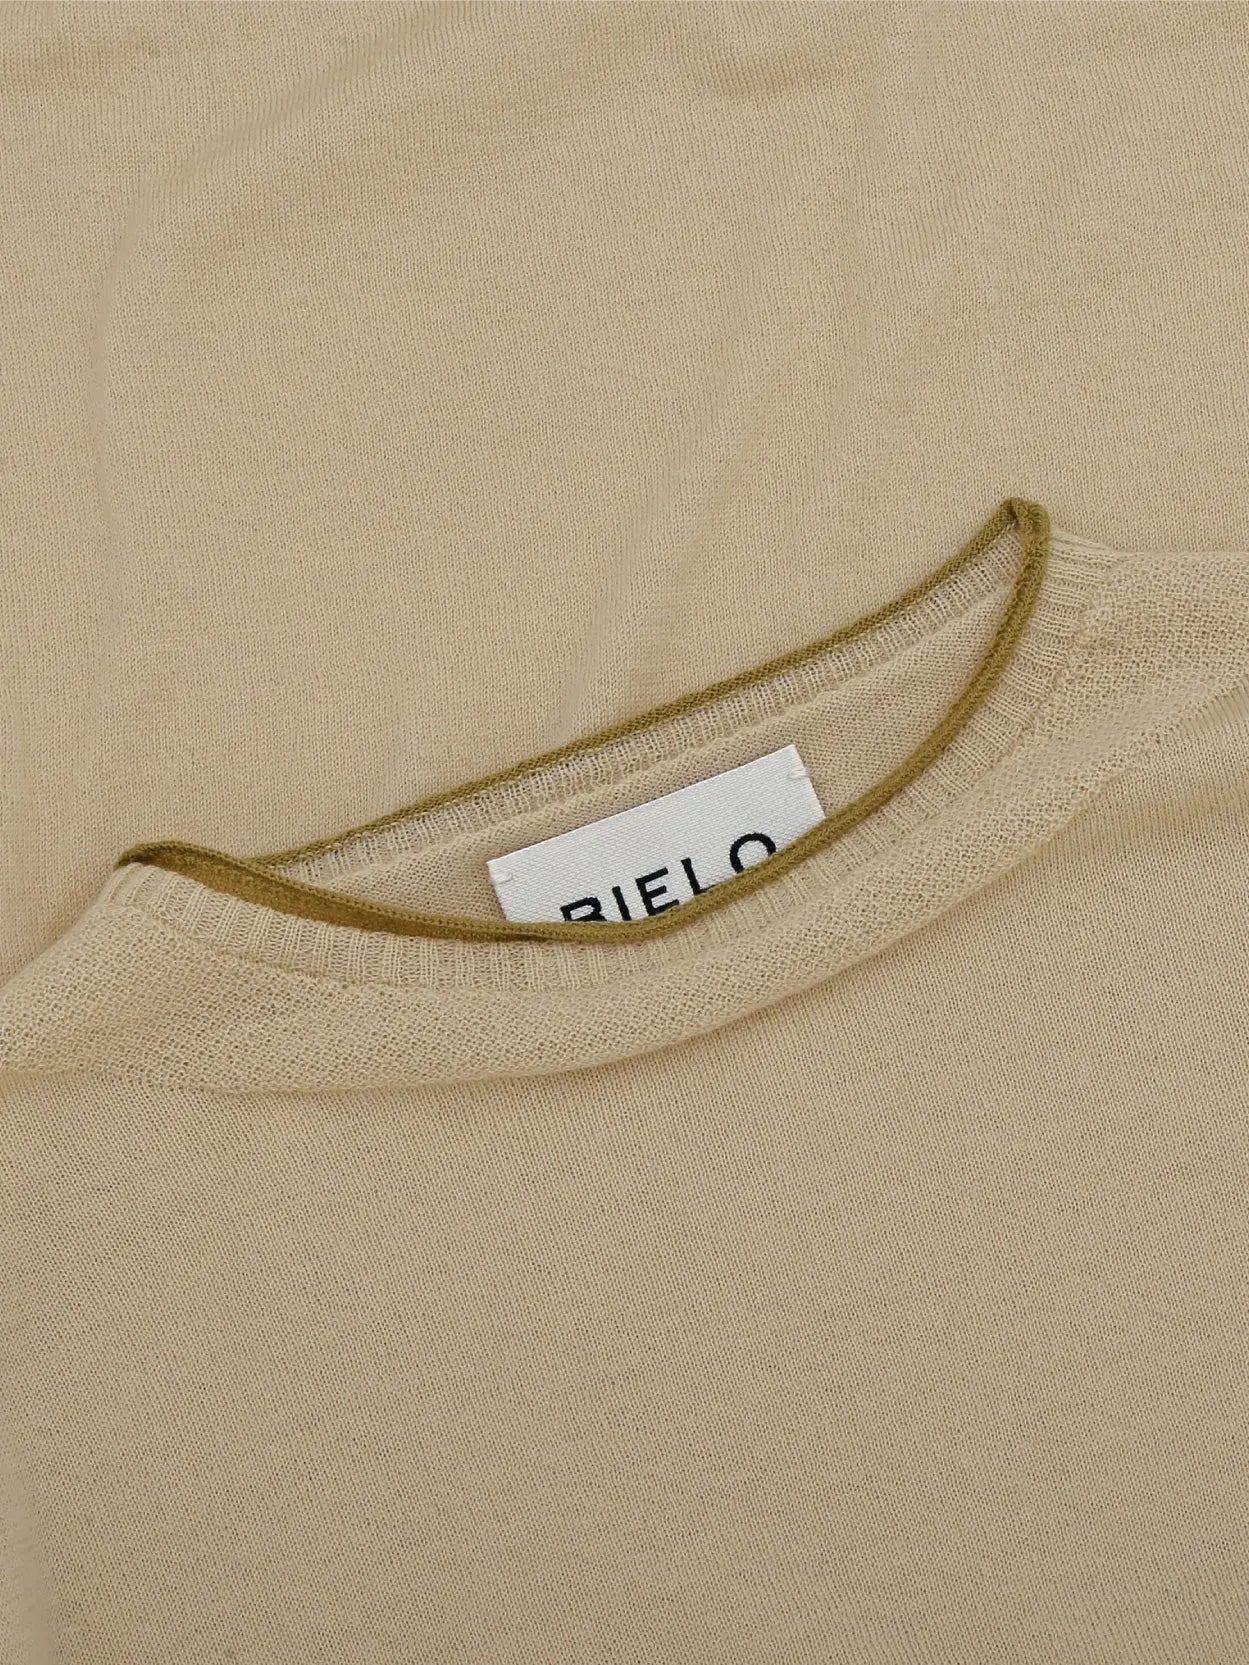 Beige, full-sleeve, crew-neck **Wist Sweater Cream** from **Bielo** laid flat on a white background. The sweater is plain with no visible patterns or designs. Discover timeless elegance with this essential piece from your favorite Barcelona-based store.